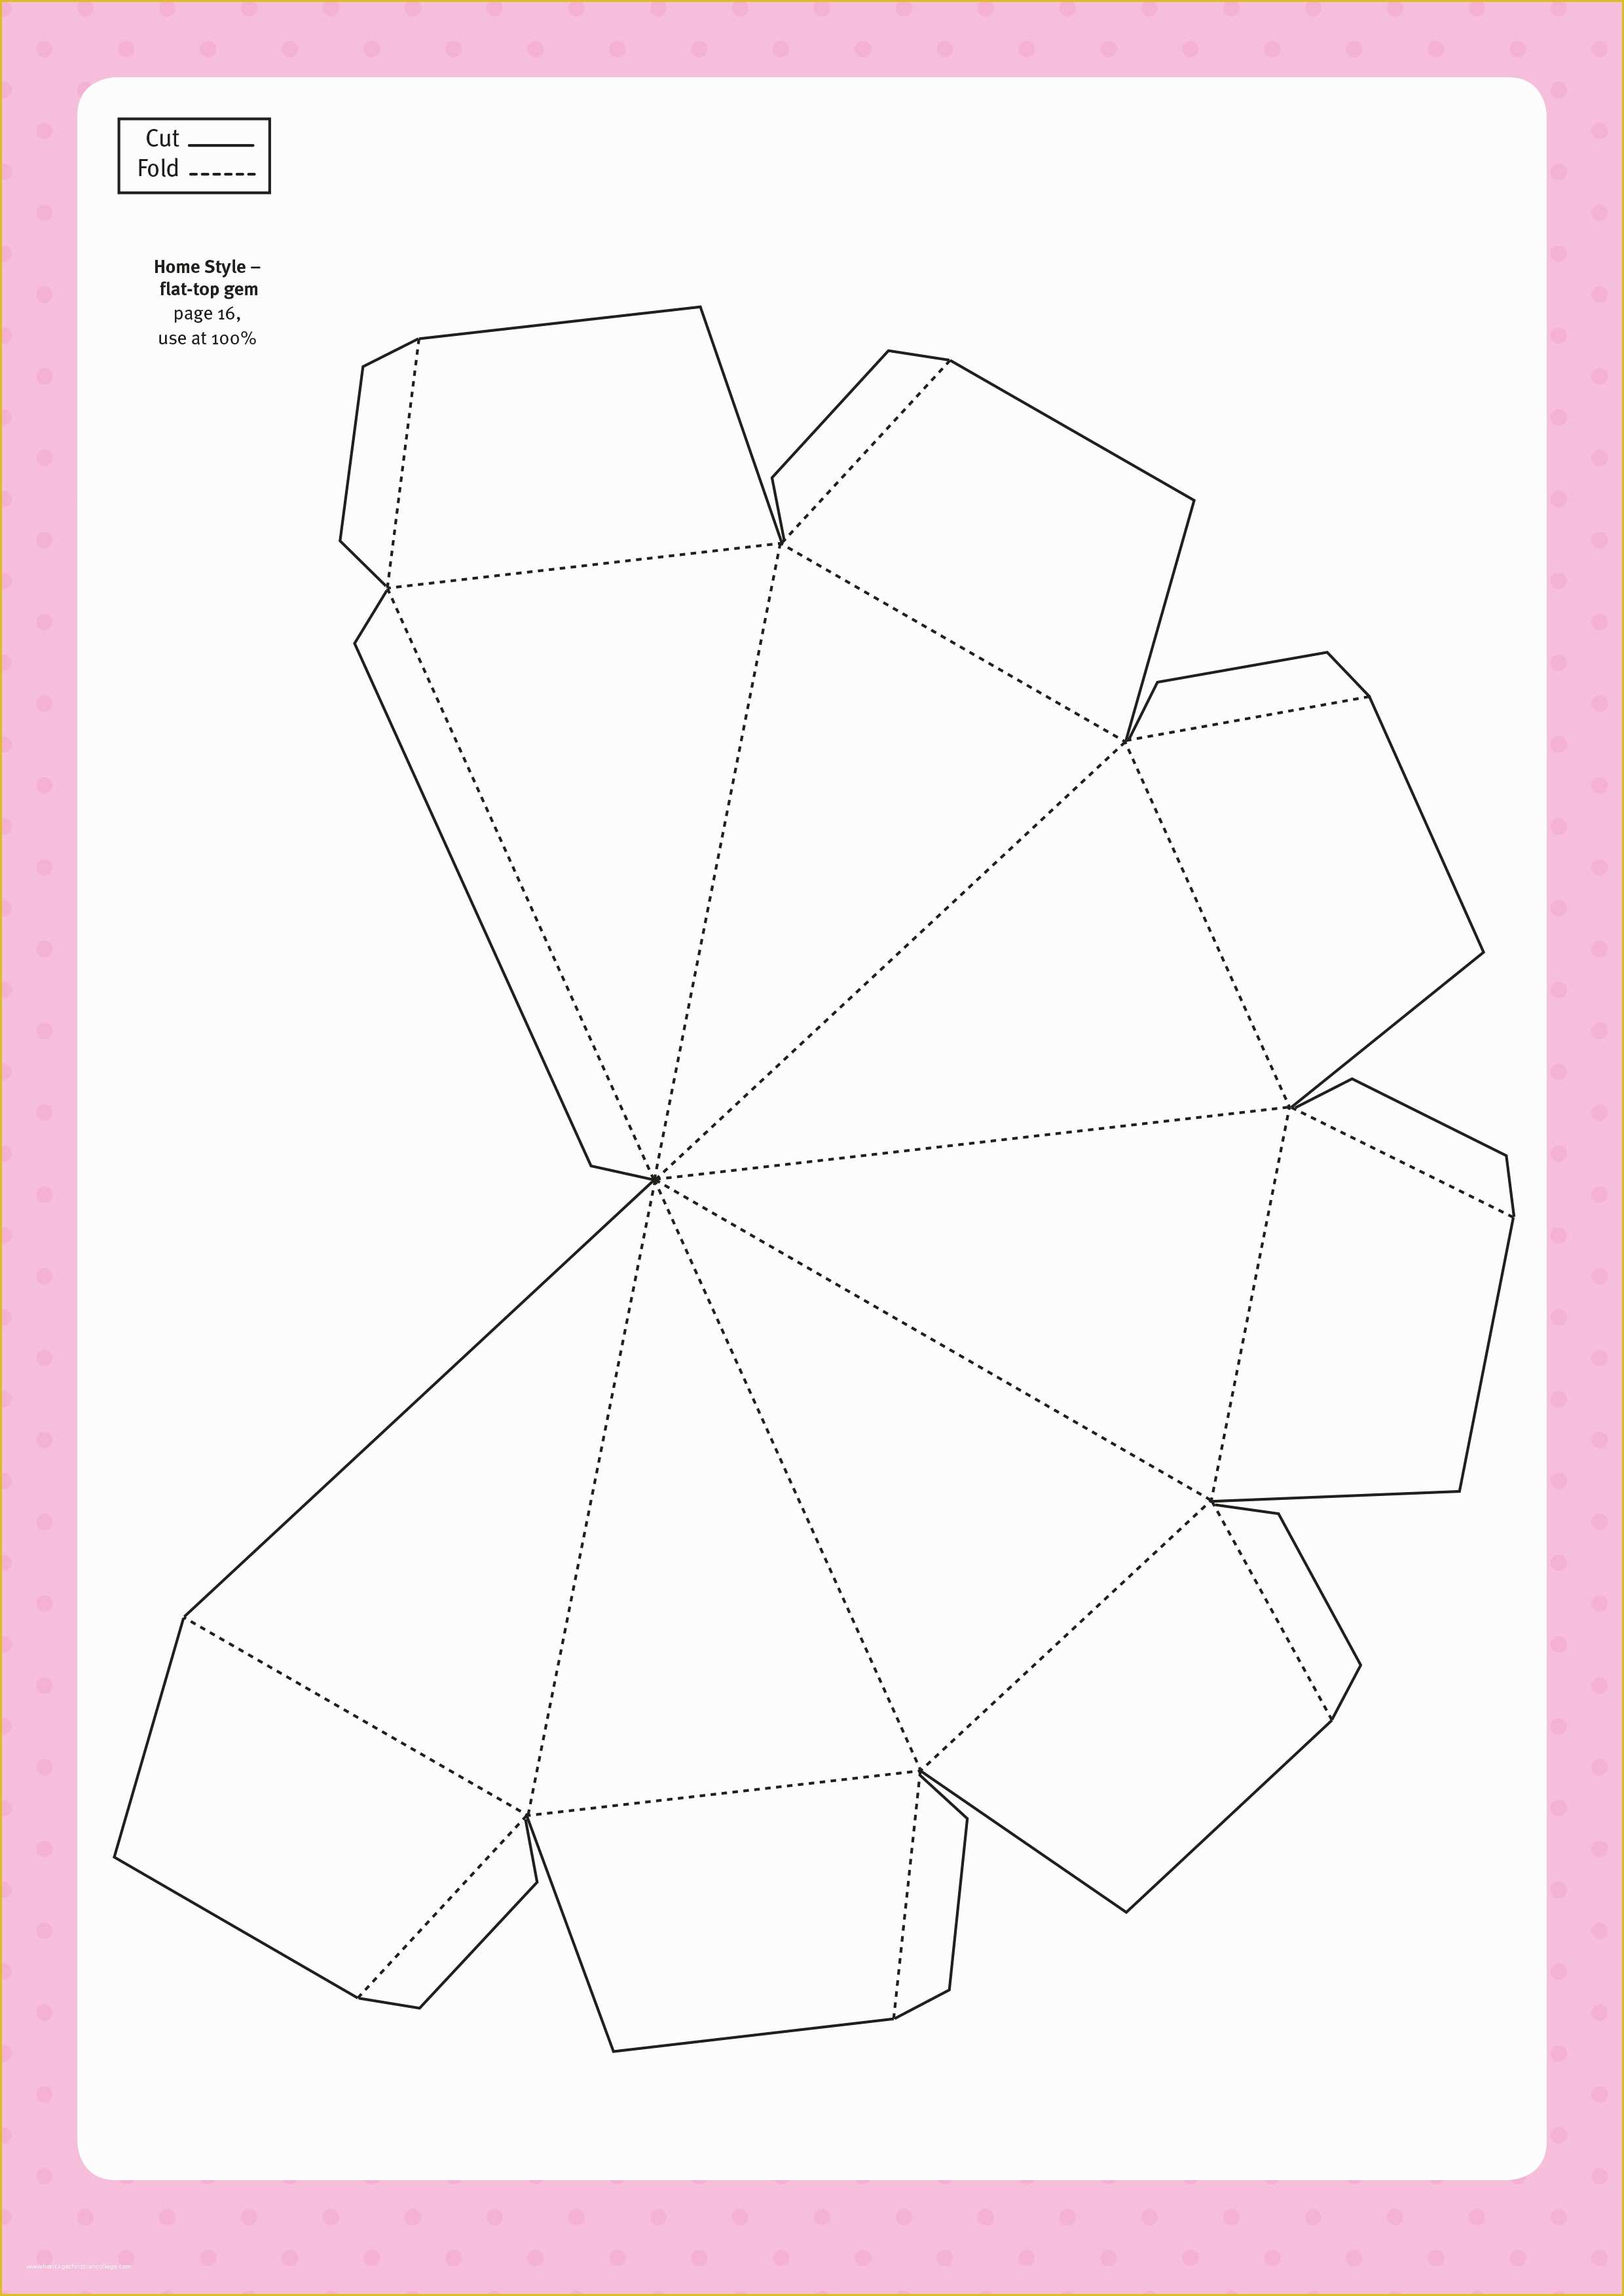 Free Card Making Templates Of Free Card Making Templates From Papercraft Inspirations